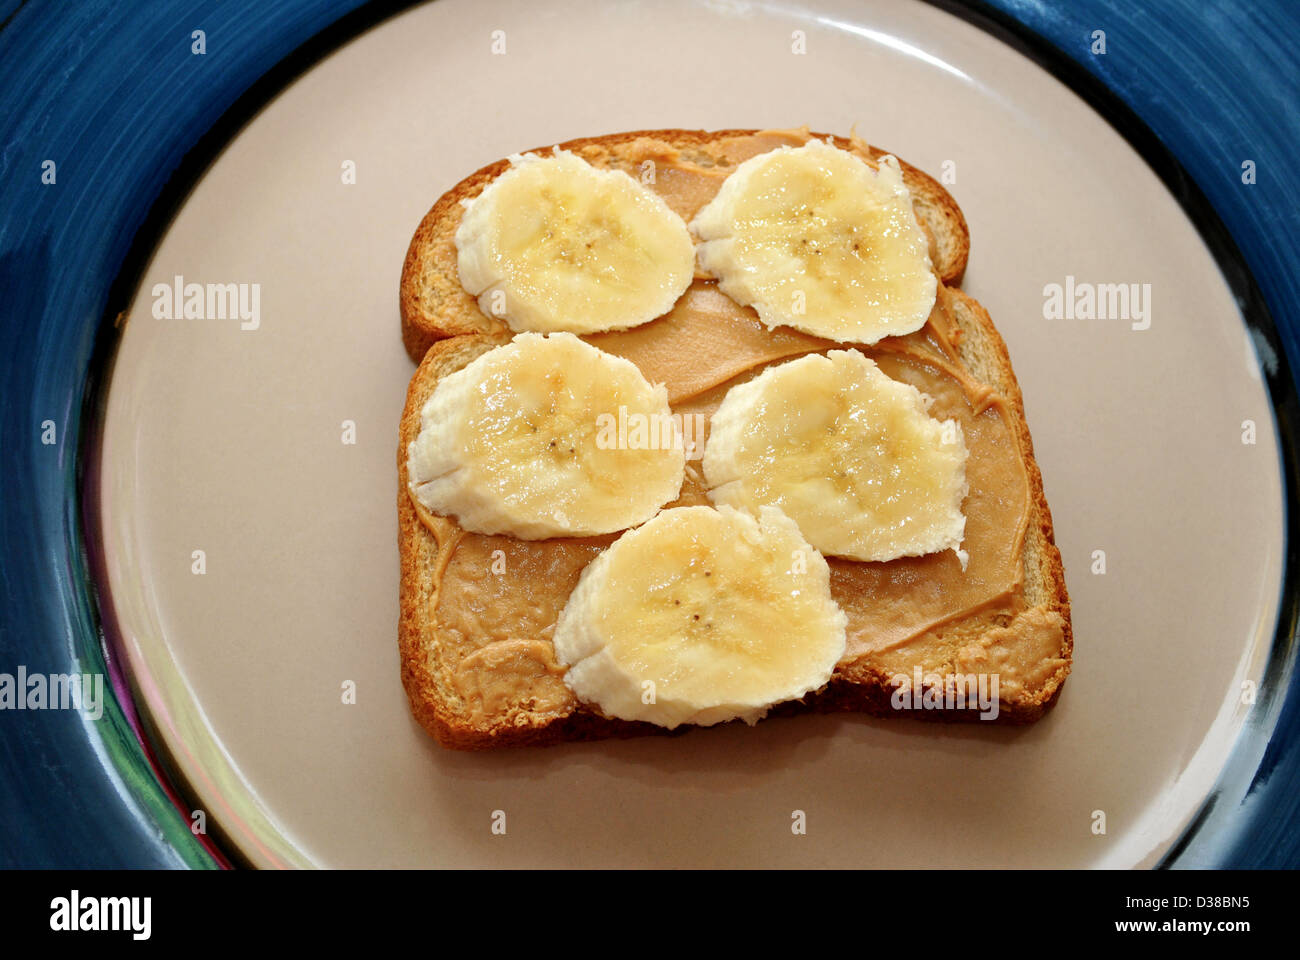 Wheat Bread with Peanutbutter and Banana Slices Stock Photo